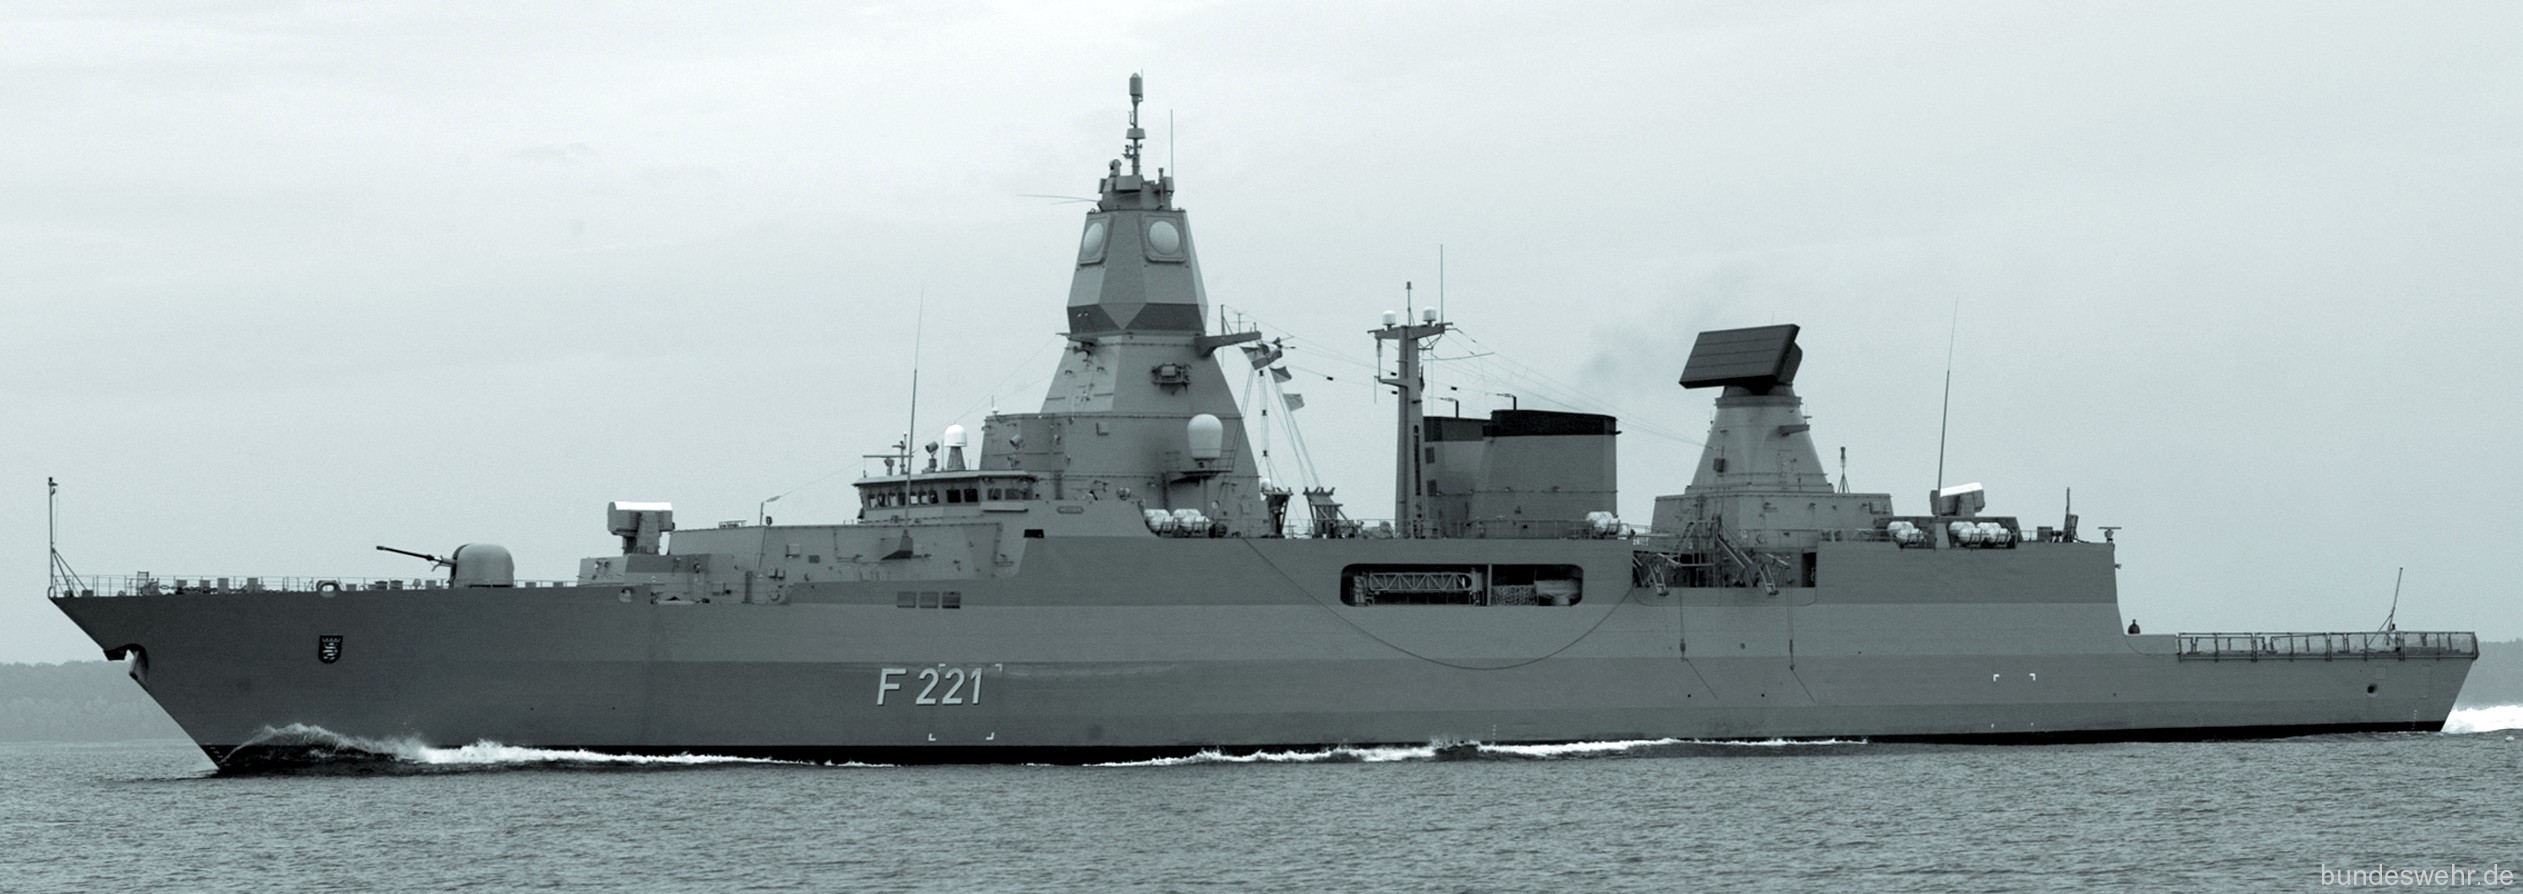 f-221 fgs hessen type 124 sachsen class guided missile frigate german navy 02